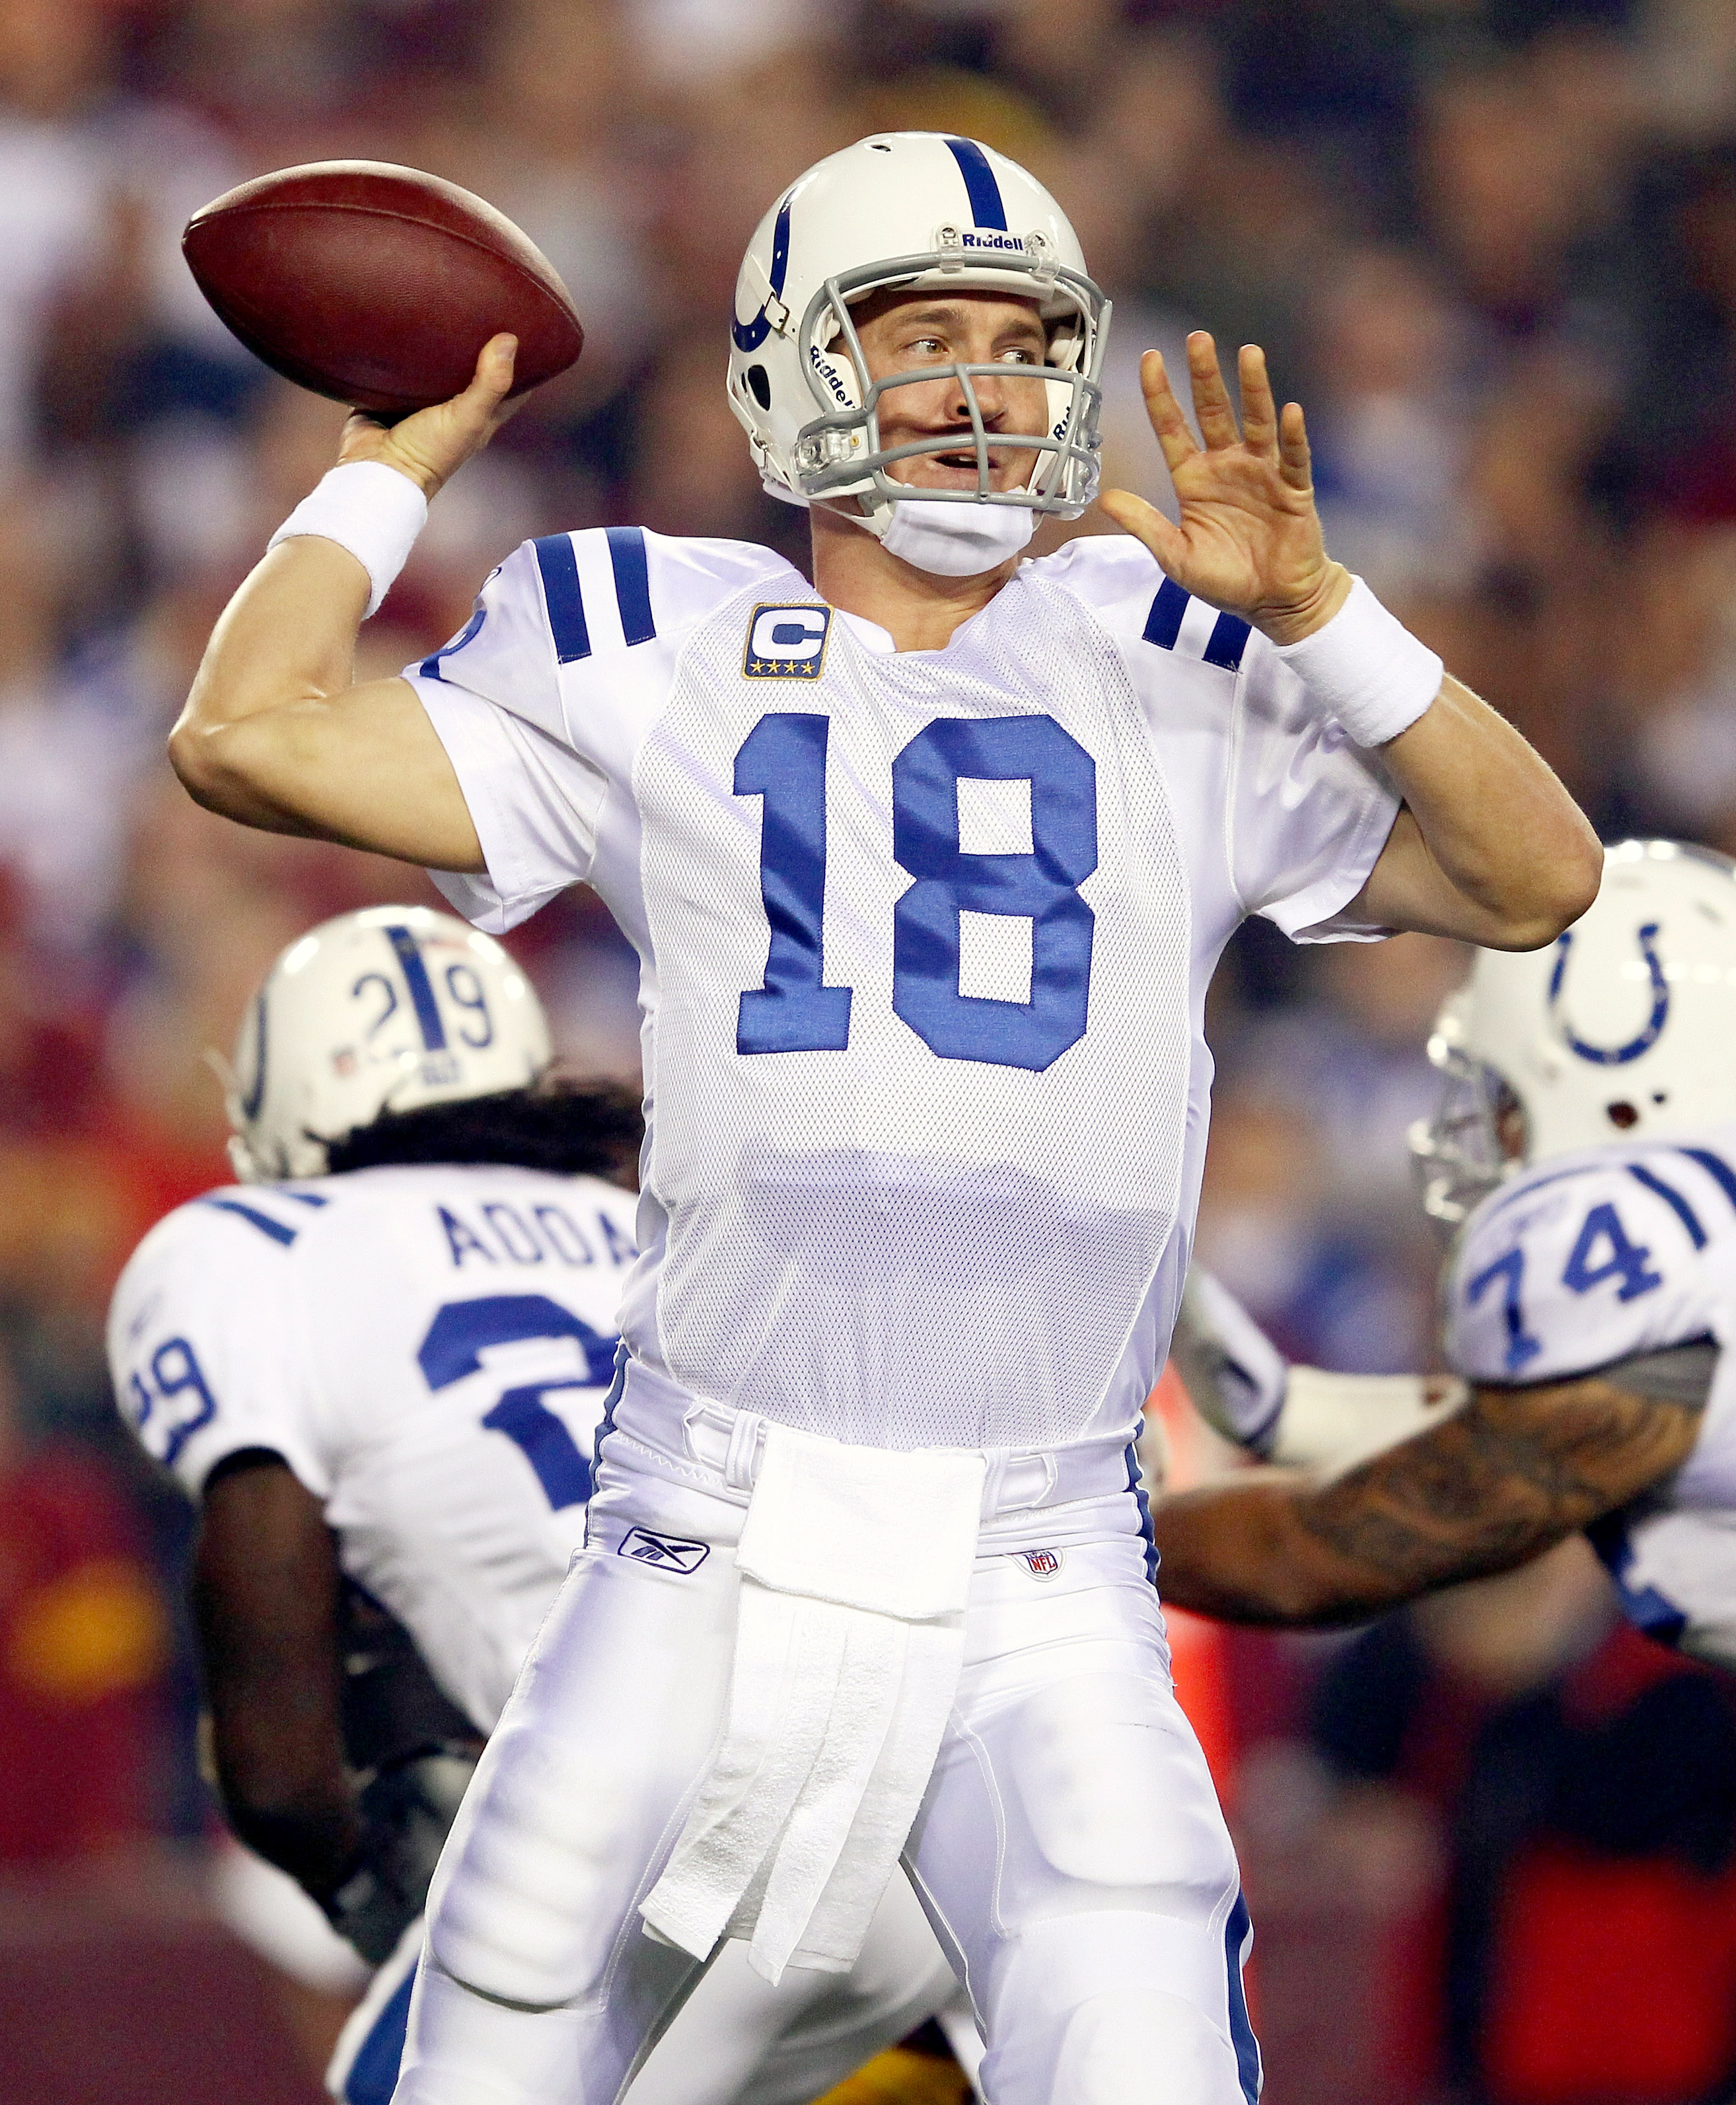 LANDOVER, MD - OCTOBER 17: Quarterback Peyton Manning #18 of the Indianapolis Colts throws a pass against the Washington Redskins at FedExField on October 17, 2010 in Landover, Maryland.  (Photo by Win McNamee/Getty Images)